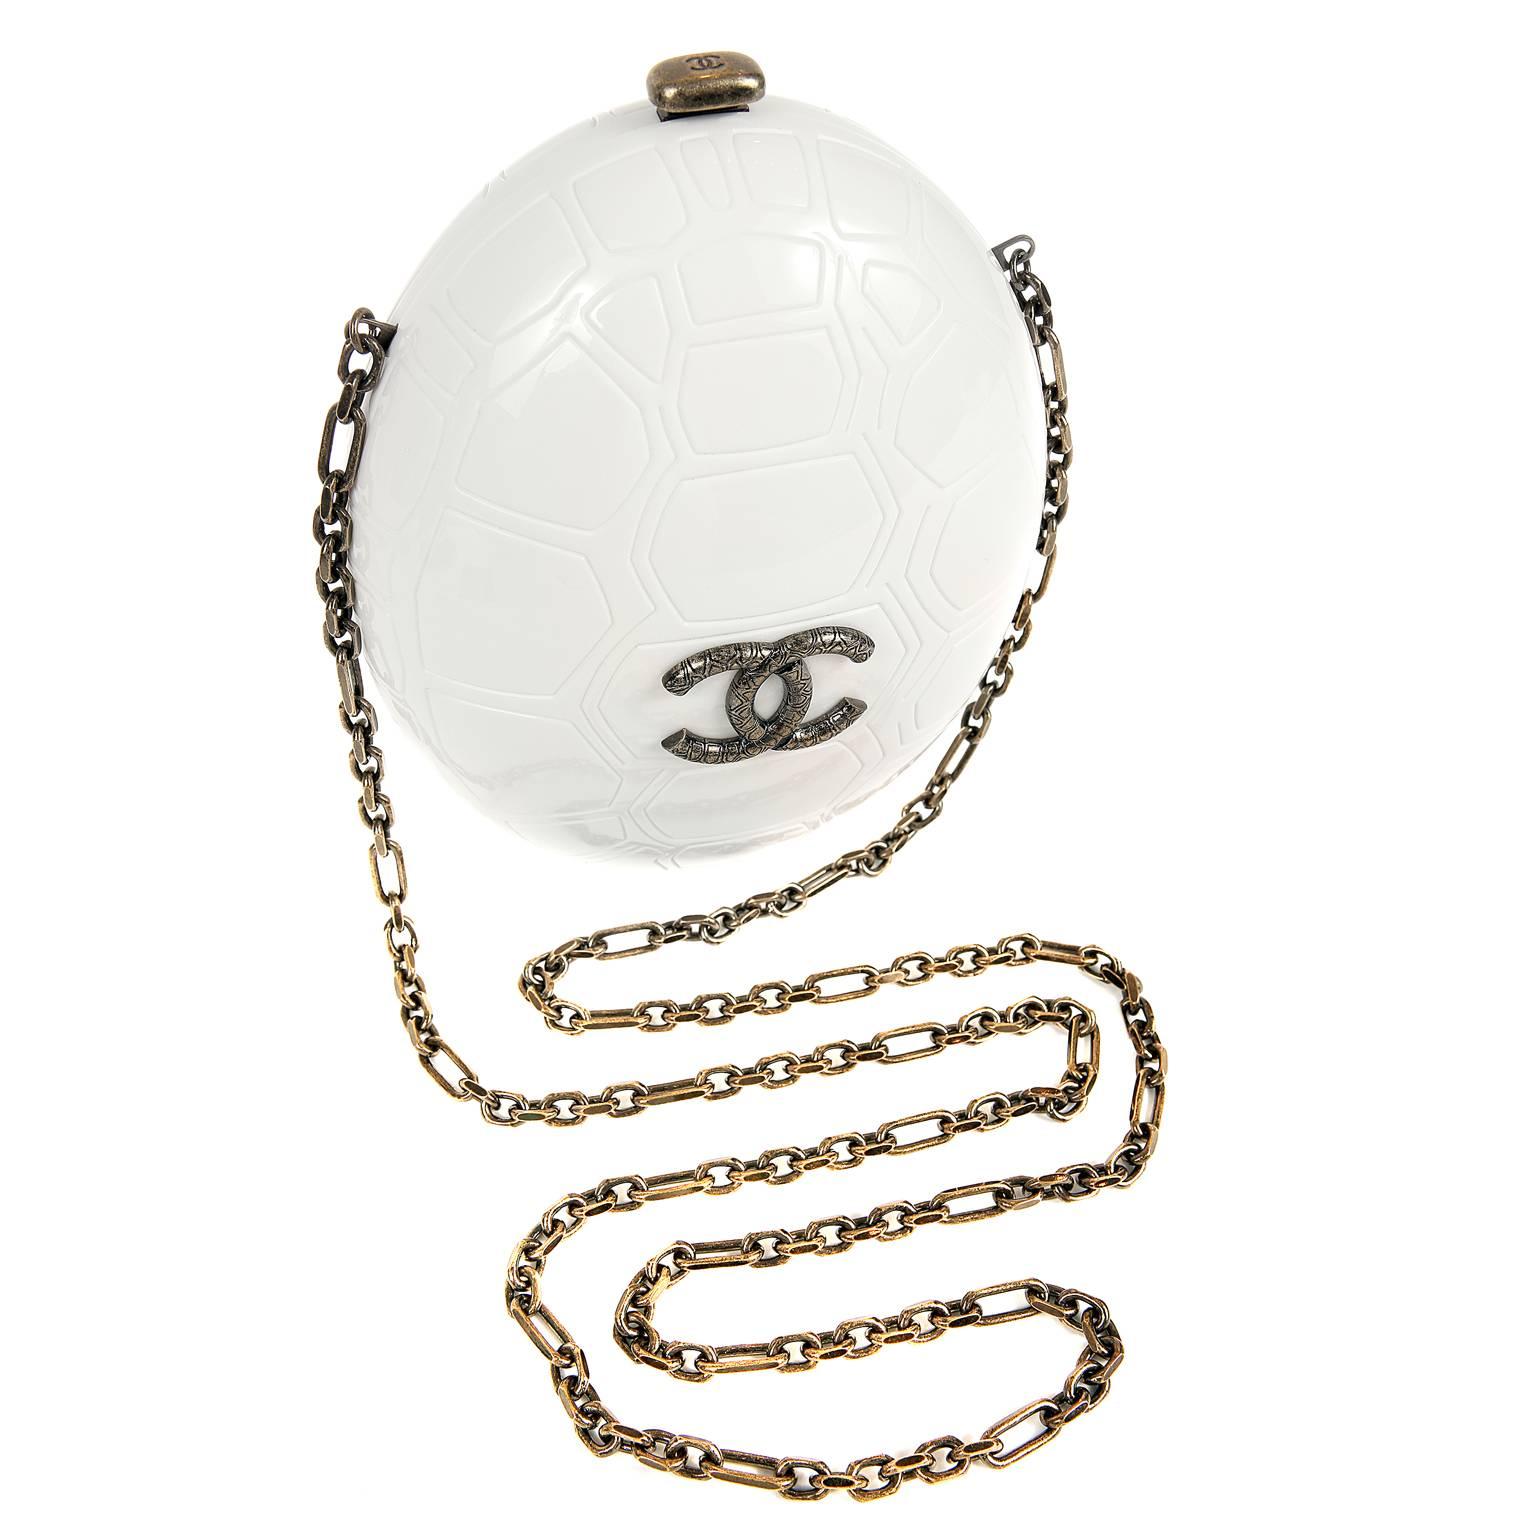 Chanel Ivory Resin Turtle Shell Print Bag with Strap- 2016 CRUISE For Sale